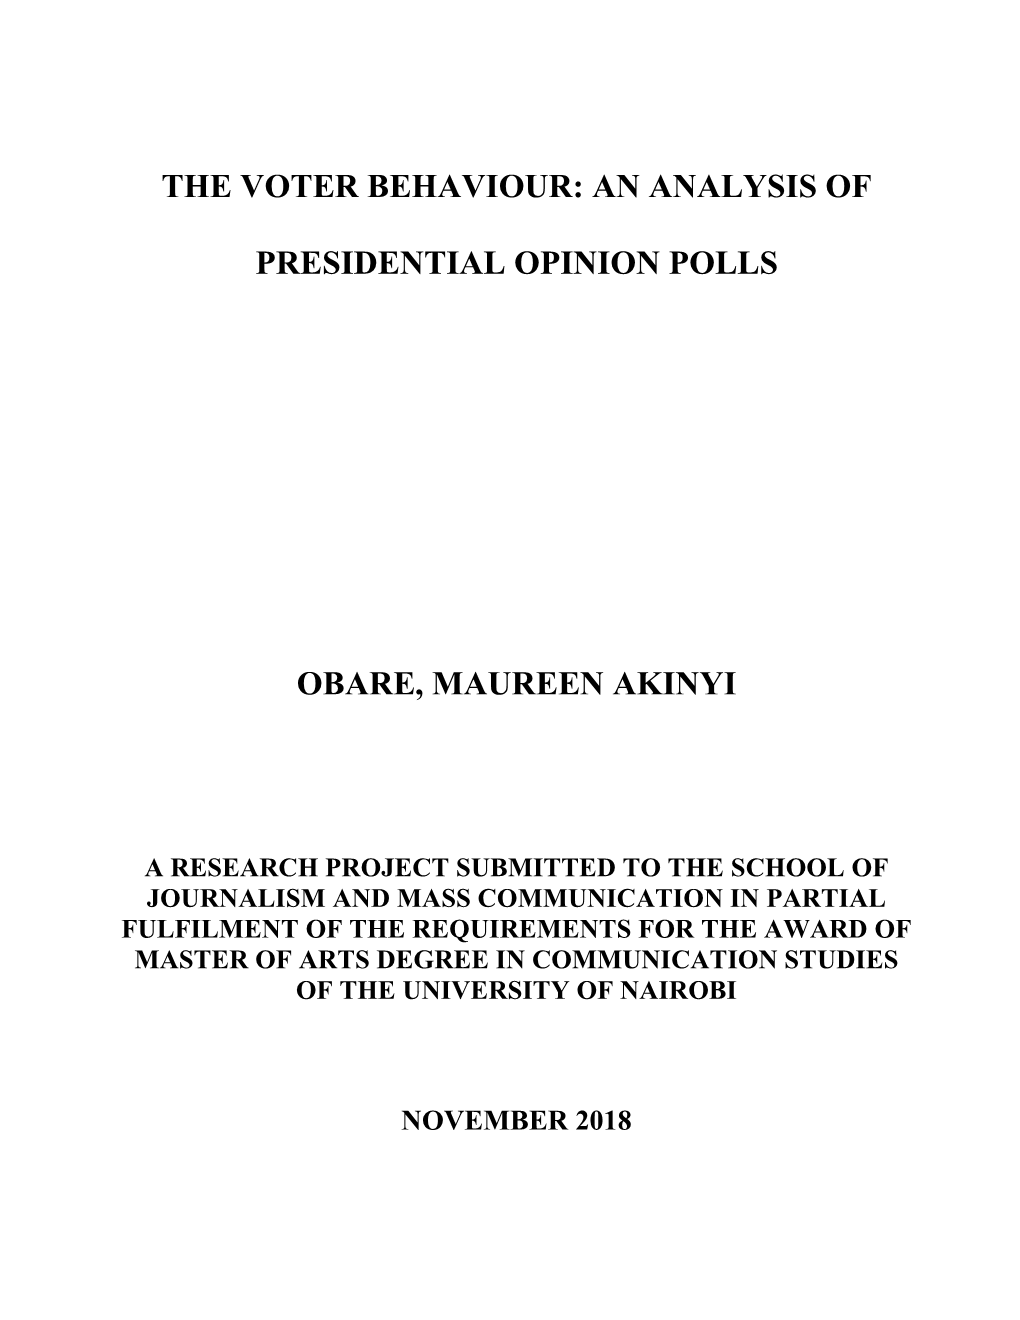 The Voter Behaviour: an Analysis of Presidential Opinion Polls